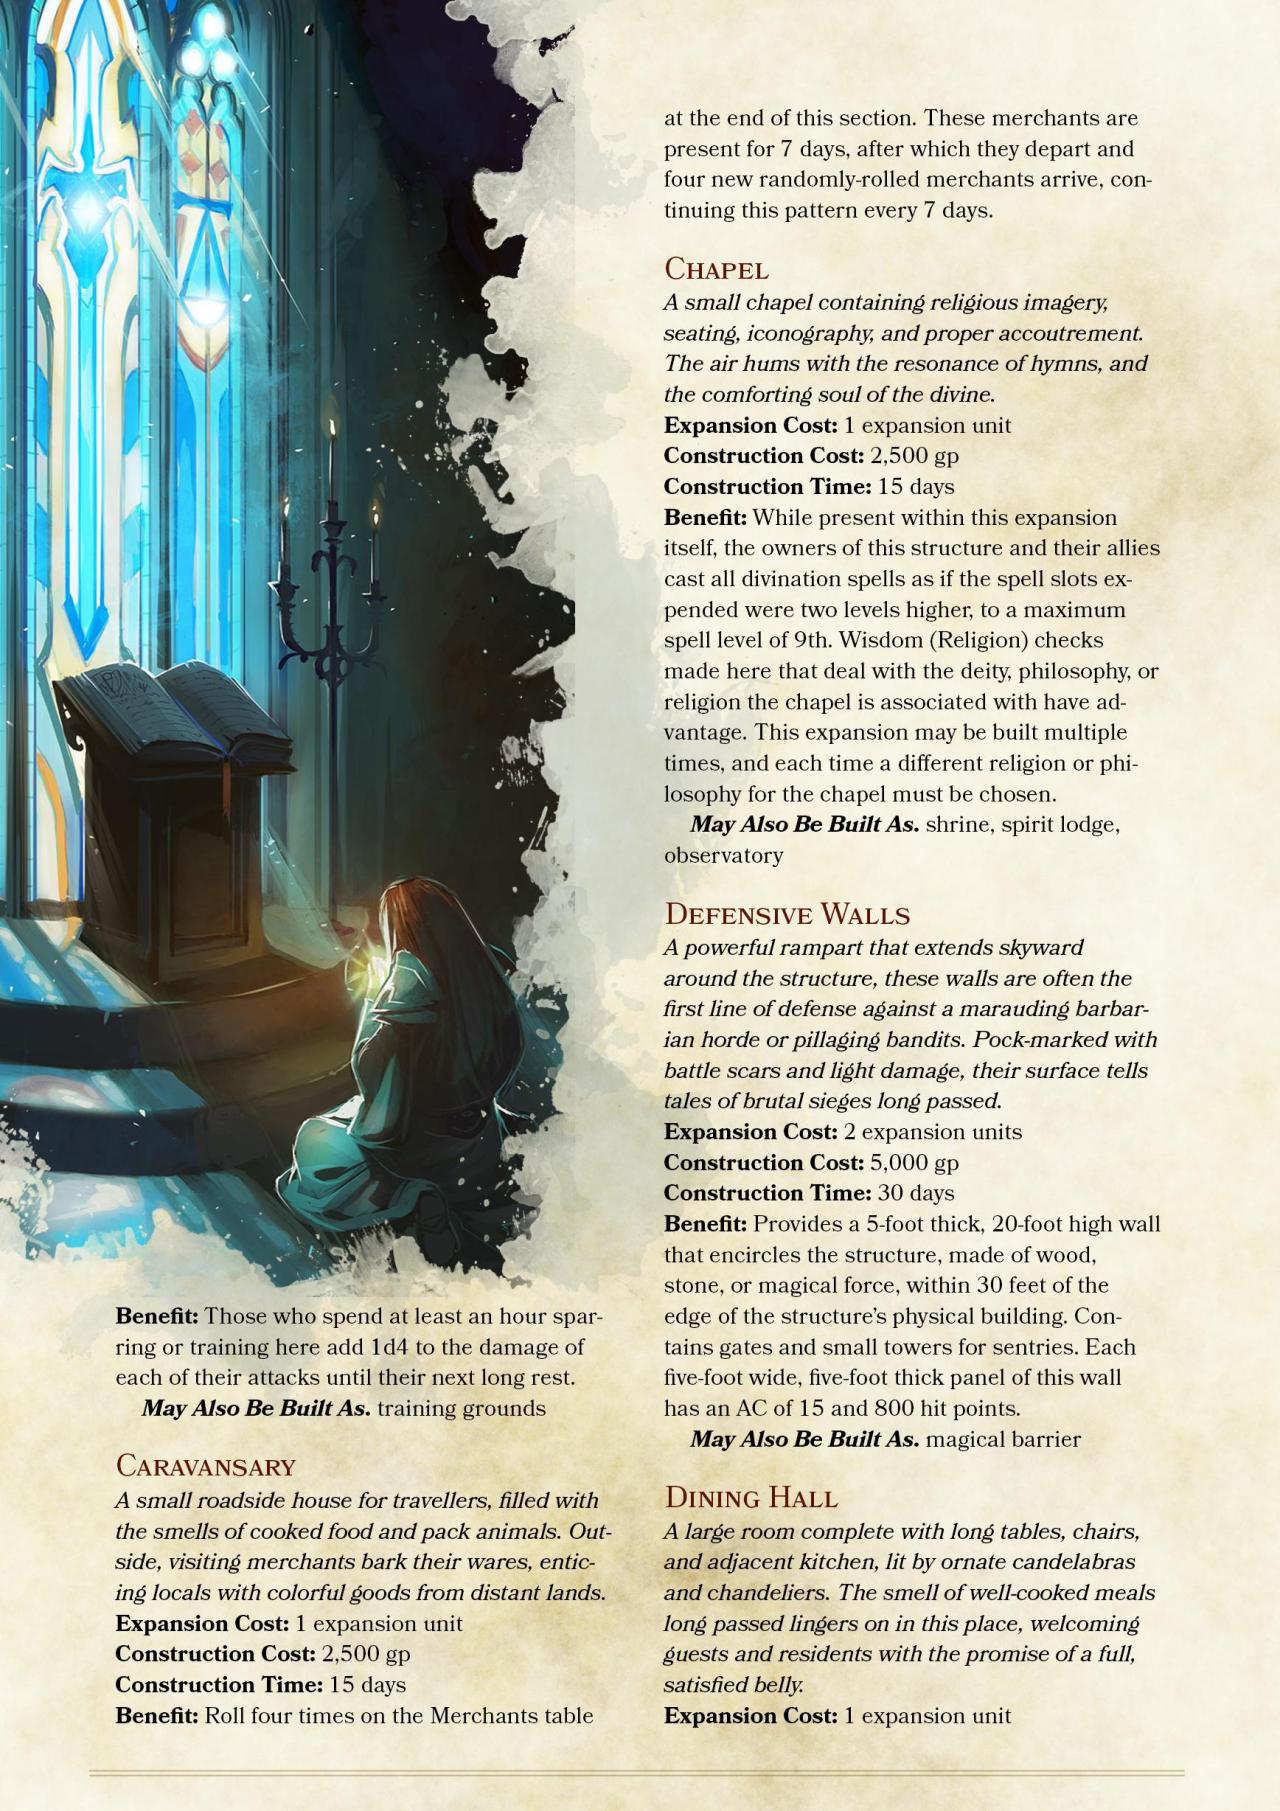 DnD 5e Homebrew — Fortresses, Strongholds and Temples for Players  Dnd  5e homebrew, Dungeons and dragons homebrew, Dungeons and dragons rules